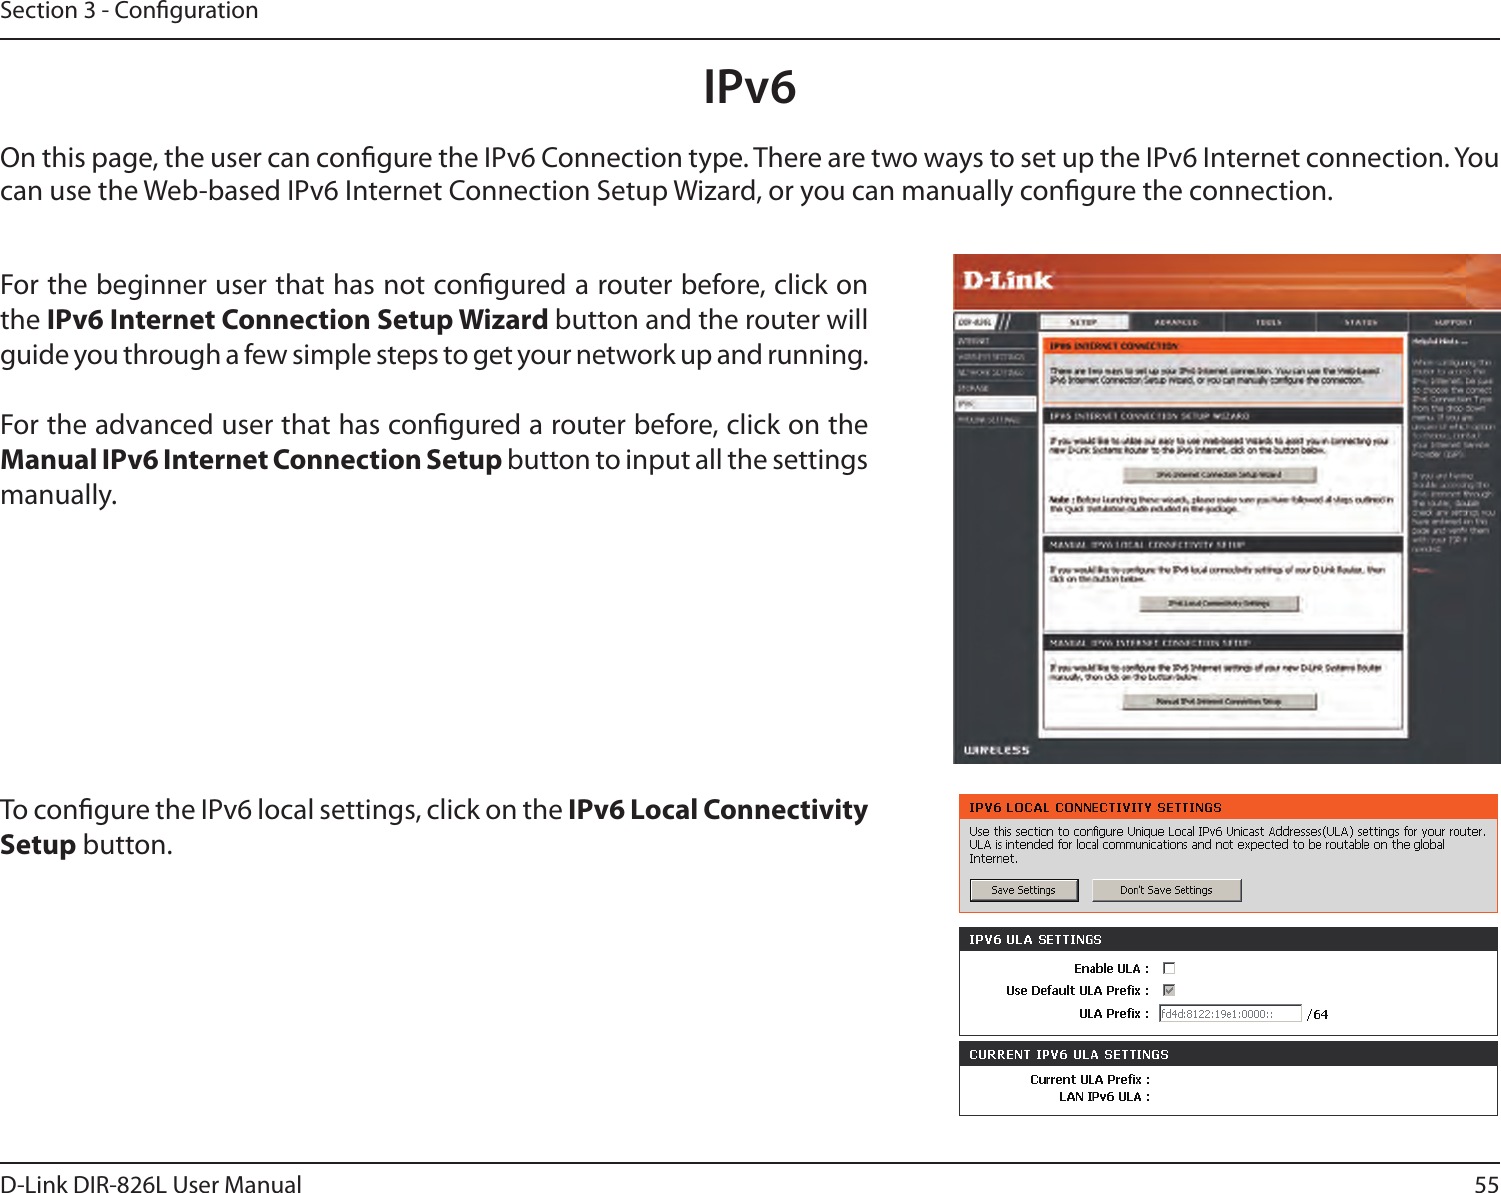 55D-Link DIR-826L User ManualSection 3 - CongurationIPv6On this page, the user can congure the IPv6 Connection type. There are two ways to set up the IPv6 Internet connection. You can use the Web-based IPv6 Internet Connection Setup Wizard, or you can manually congure the connection.For the beginner user that has not congured a router before, click on the IPv6 Internet Connection Setup Wizard button and the router will guide you through a few simple steps to get your network up and running.For the advanced user that has congured a router before, click on the Manual IPv6 Internet Connection Setup button to input all the settings manually.To congure the IPv6 local settings, click on the IPv6 Local Connectivity Setup button.